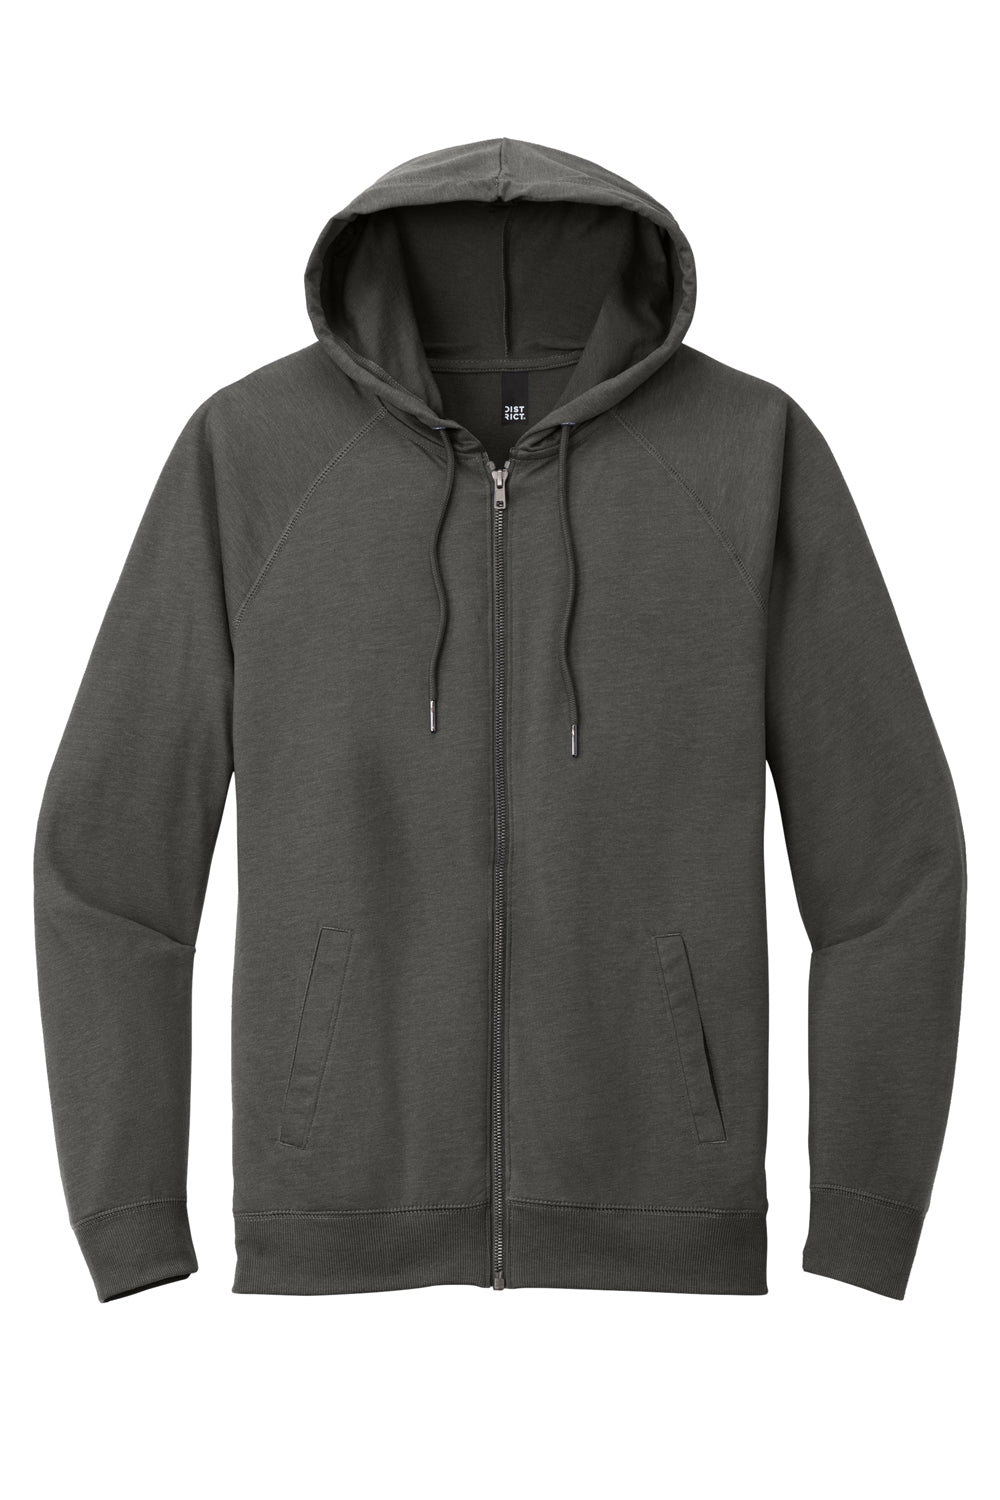 District Mens French Terry Full Zip Hooded Sweatshirt Hoodie Washed Coal Grey Flat Front